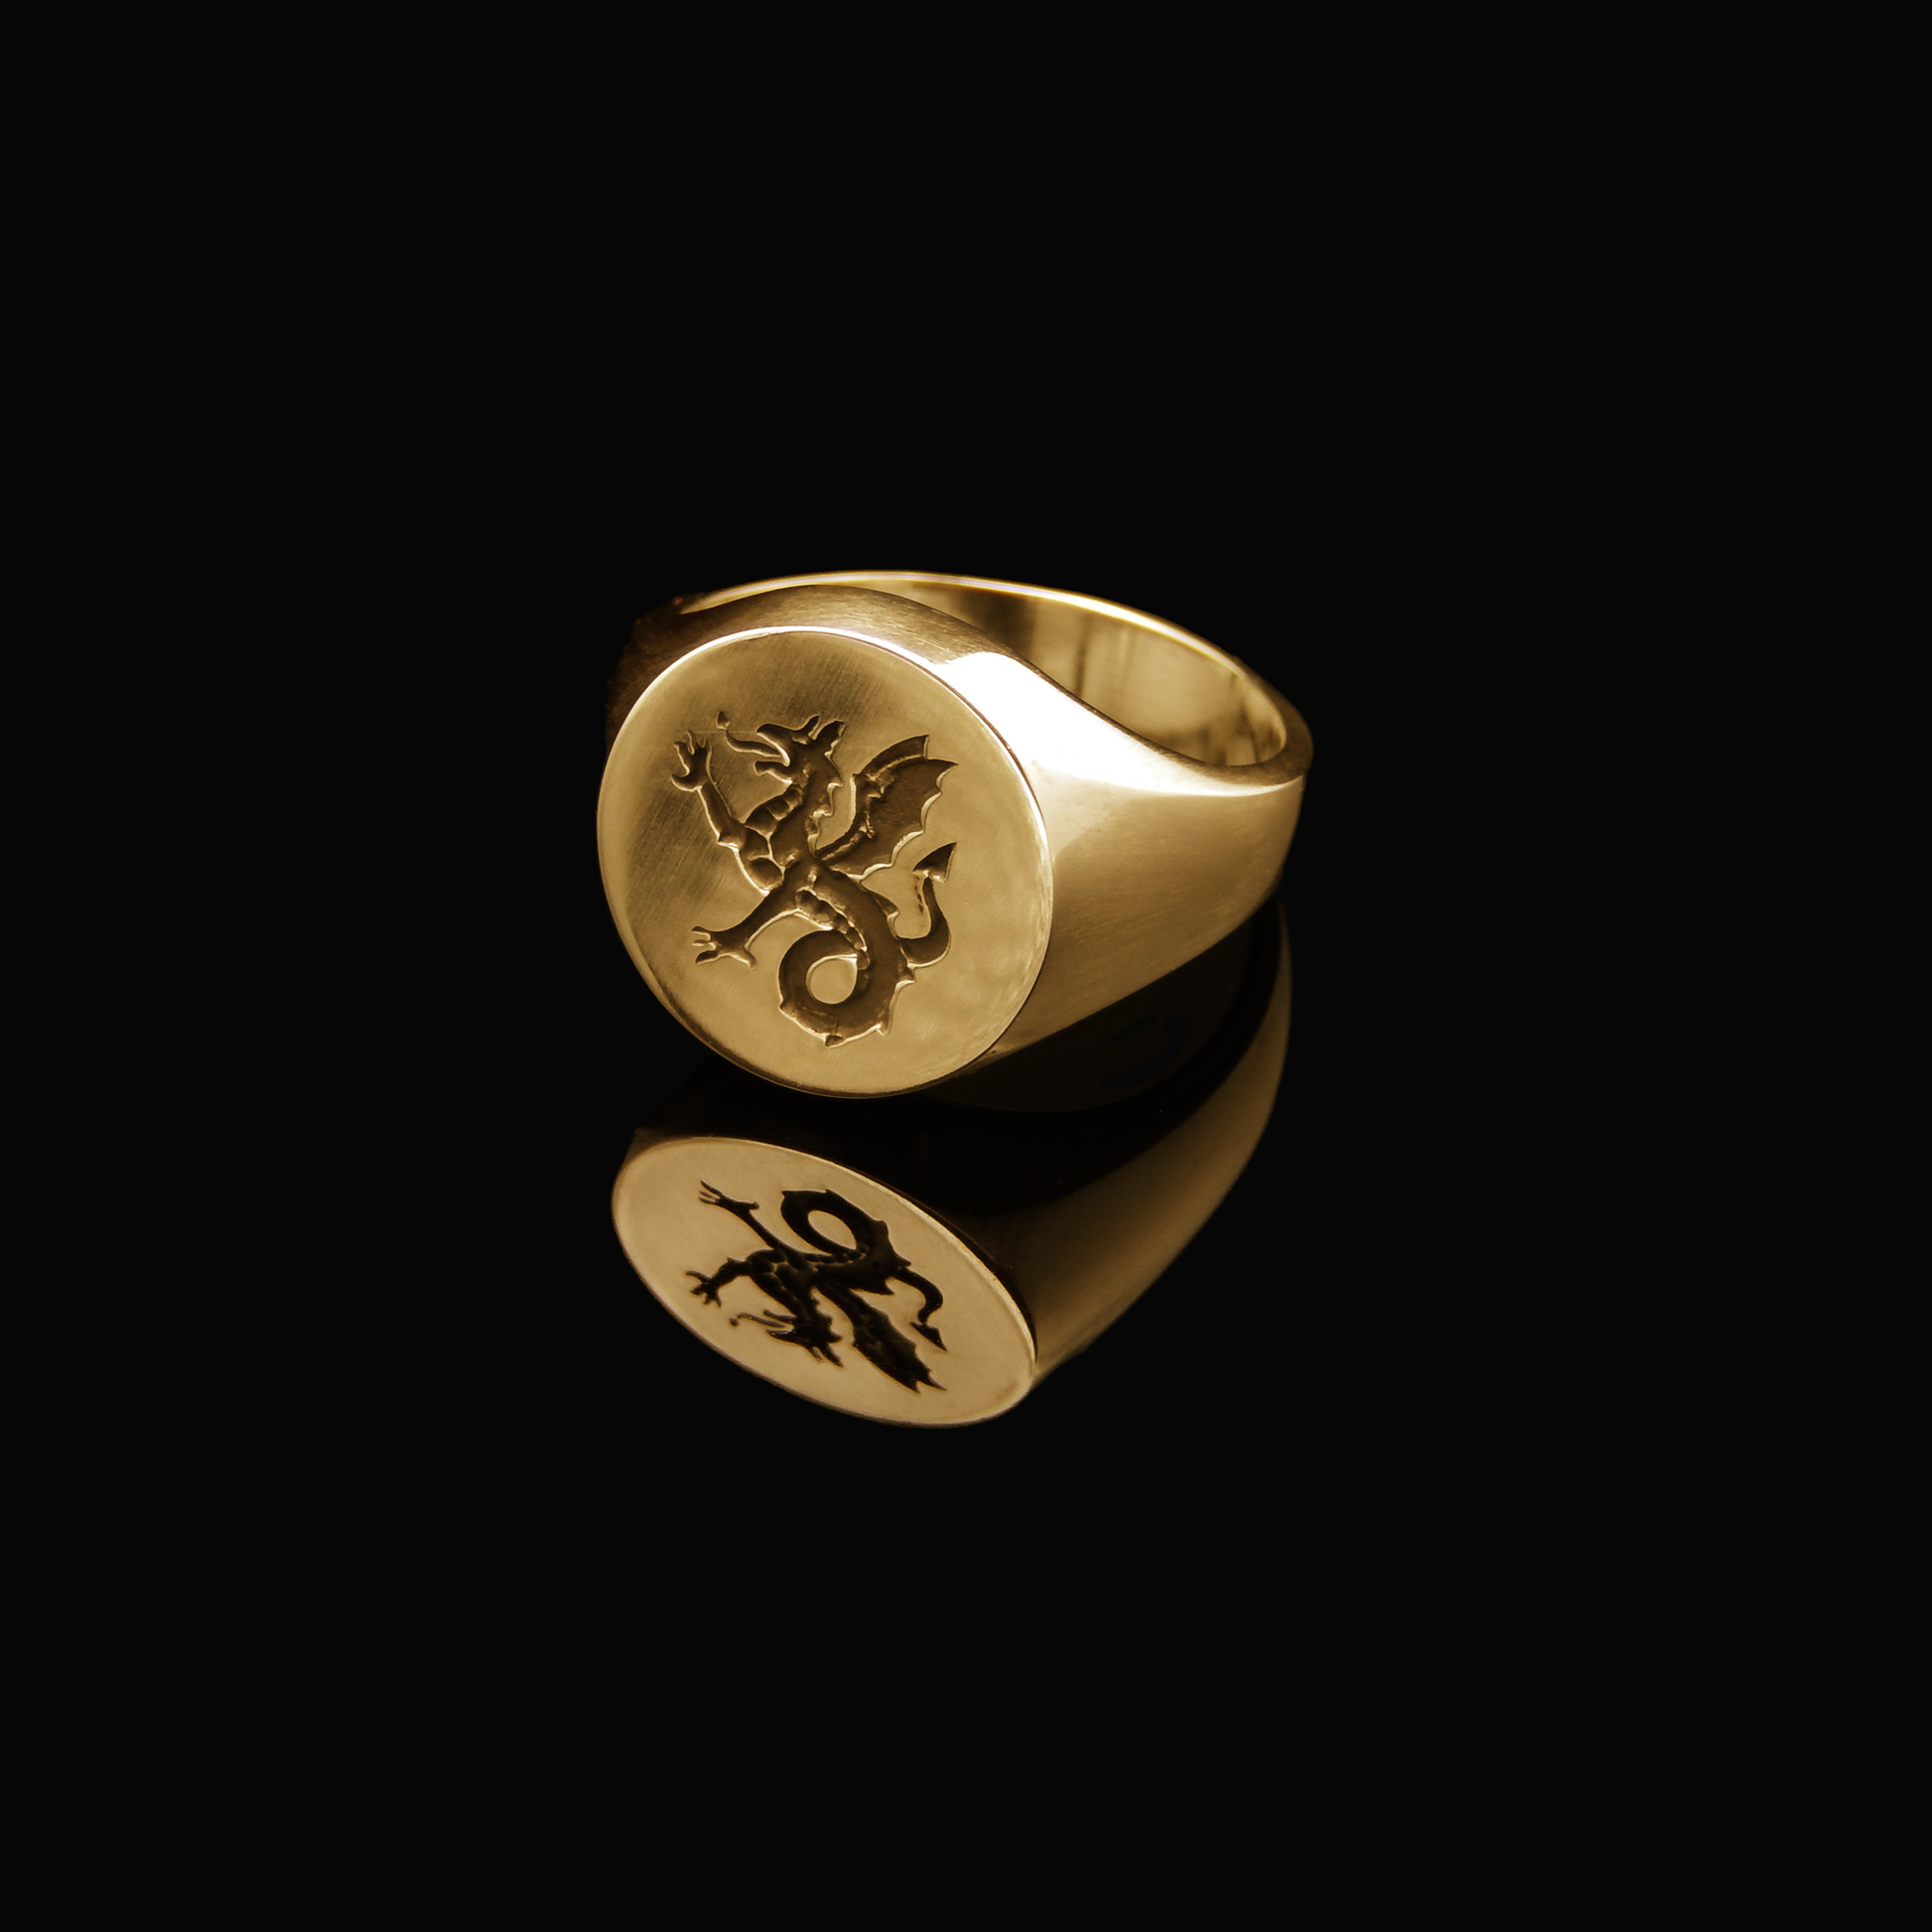 Yellow Gold, Gold Ring, Quarter View, Dragon Ring, Signet Ring, Historical Ring, Heraldry, Wyvern, Wyvern Ring,  White Gold Ring, Gold, Magic Ring, Fantasy Ring, Medieval Ring, English Ring, Rings for Him, Gifts for Him, Mens Signet Ring